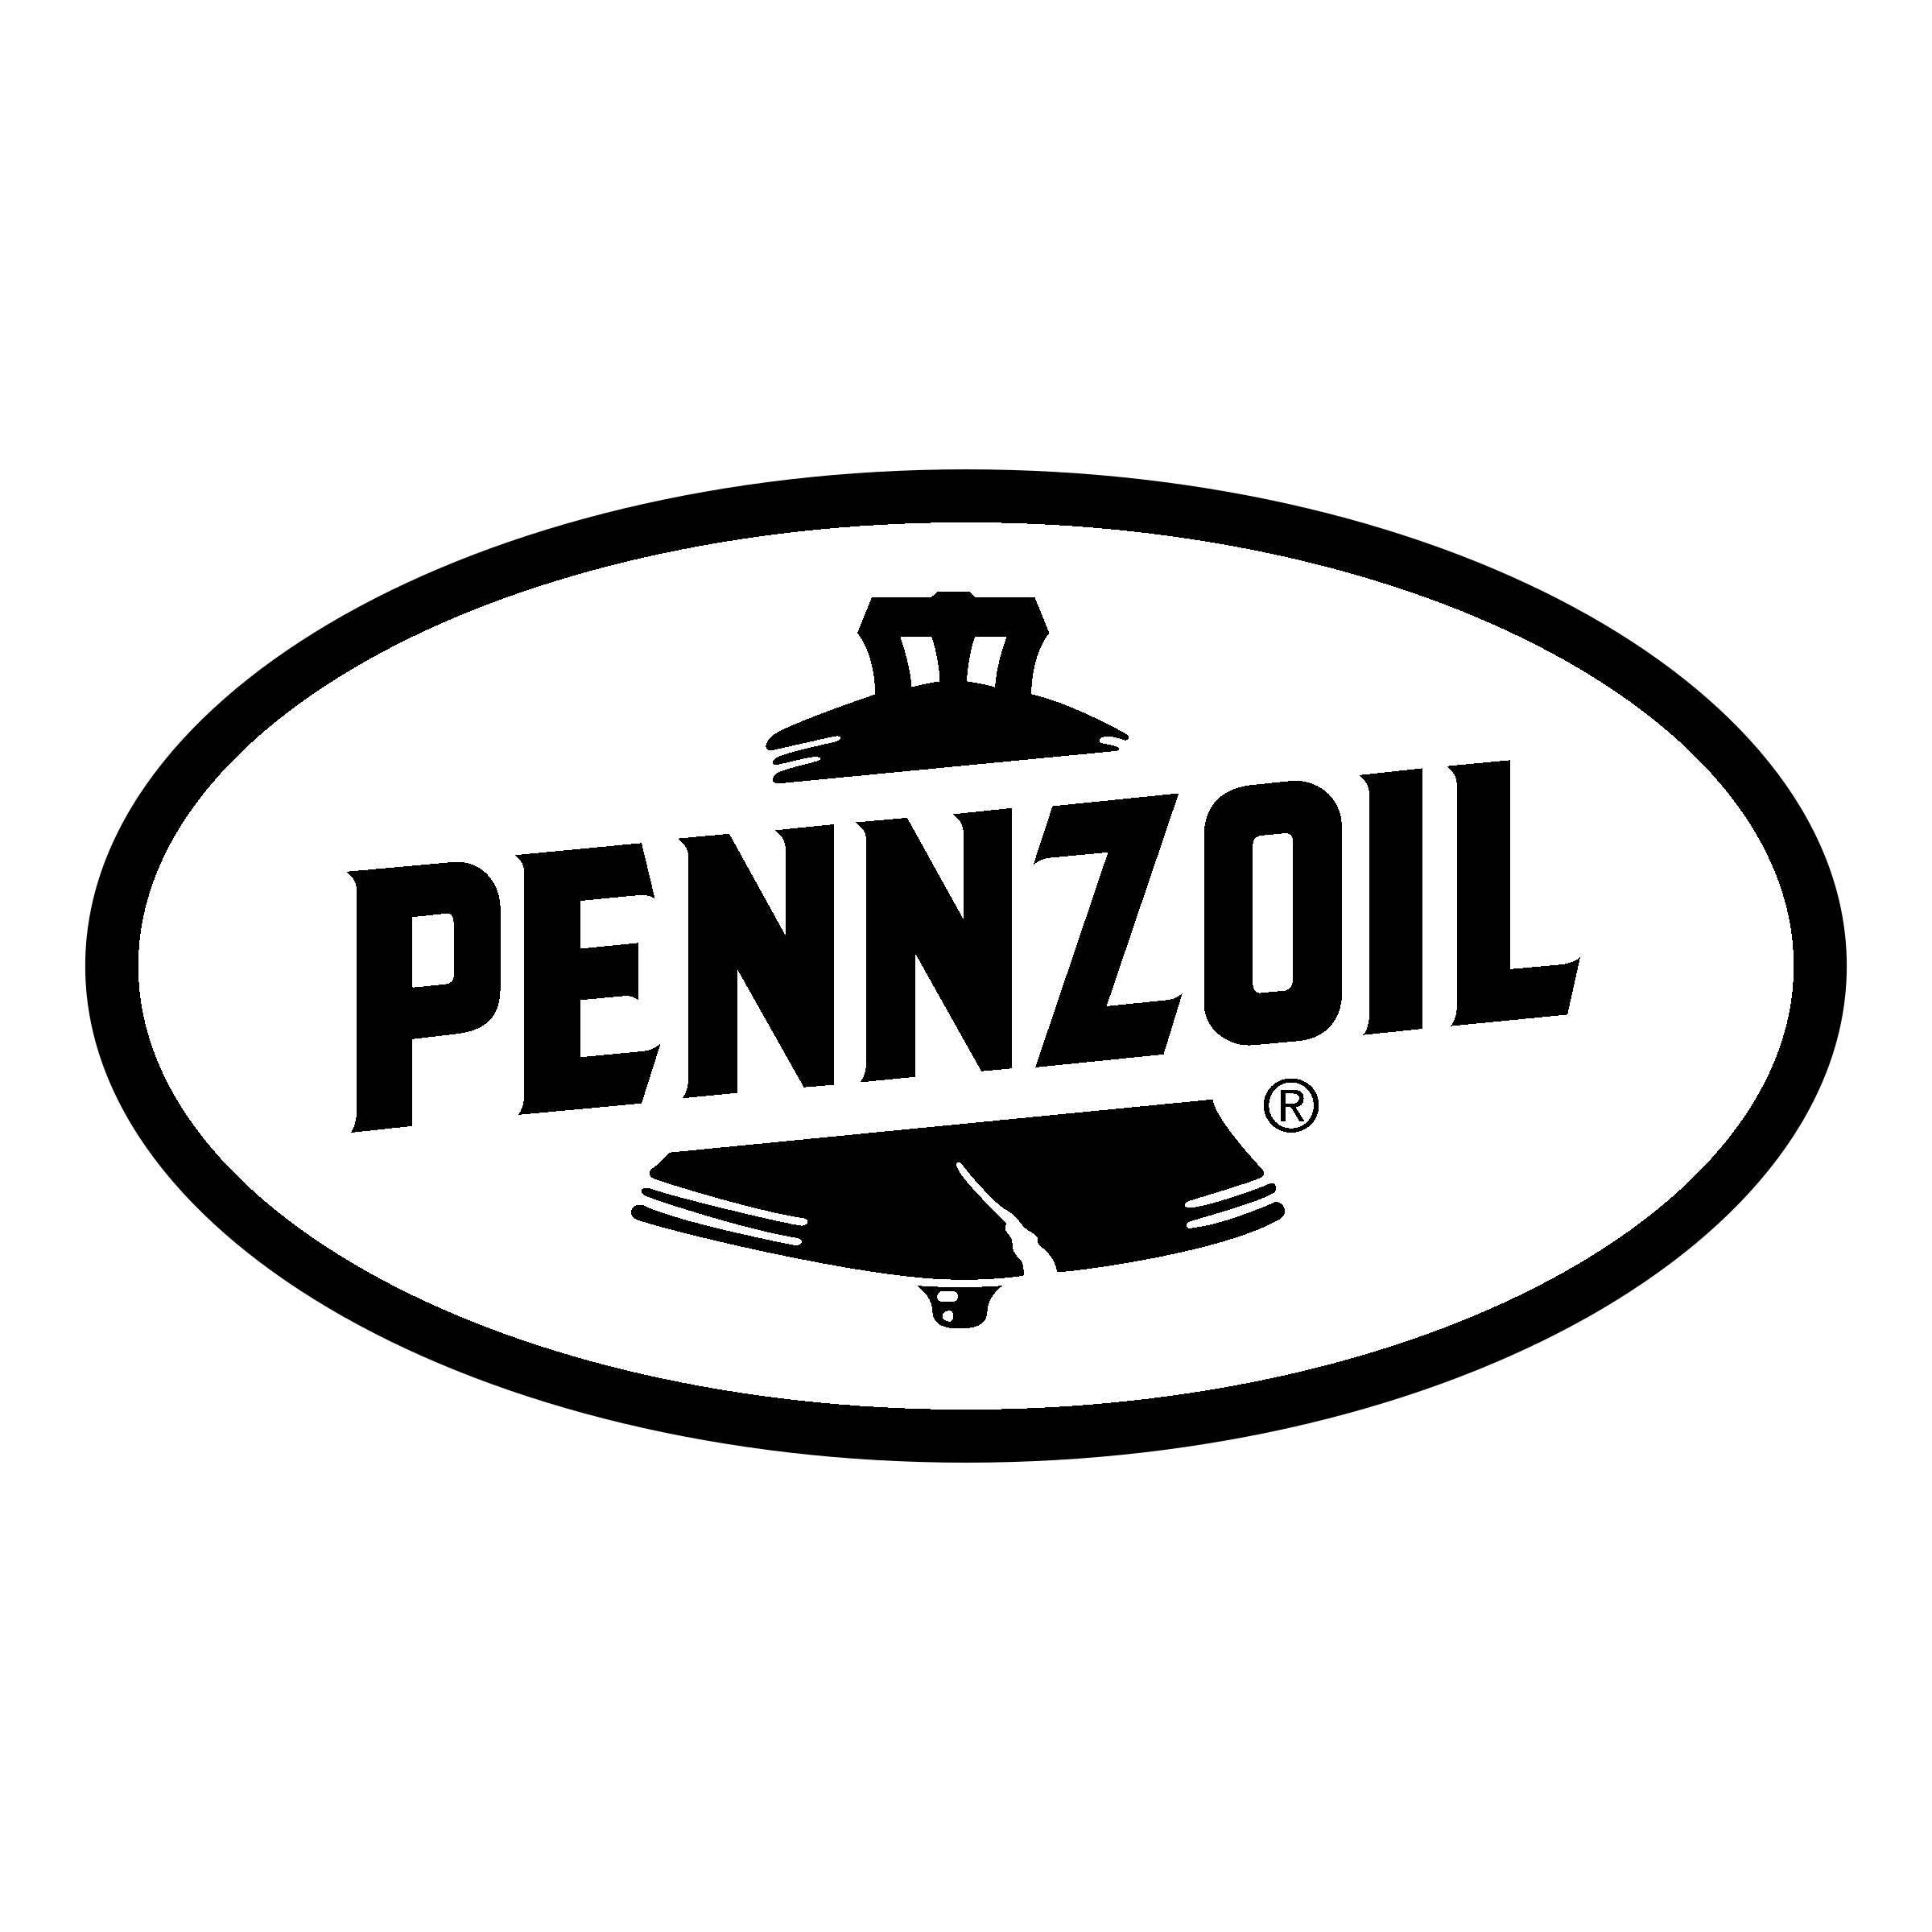 pennzoil-3-logo-black-and-white.png